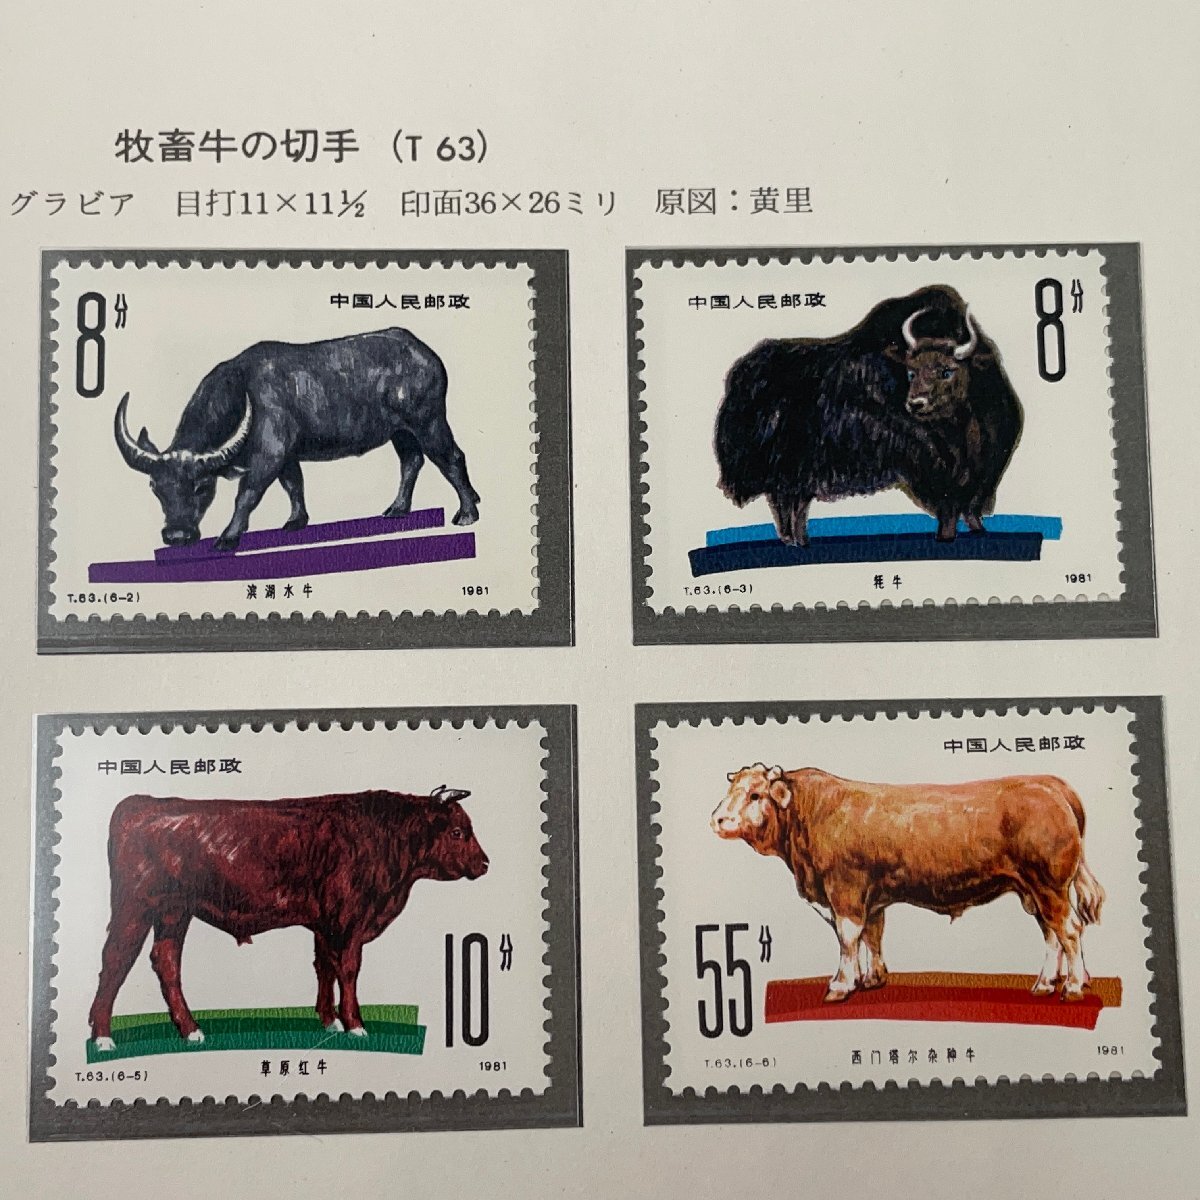 m002 C3(10) 34 China stamp postage 385 jpy storage goods T61 bonsai stamp T63.. cow. stamp 1981 year each 6 kind . Boss to-k leaf attaching 